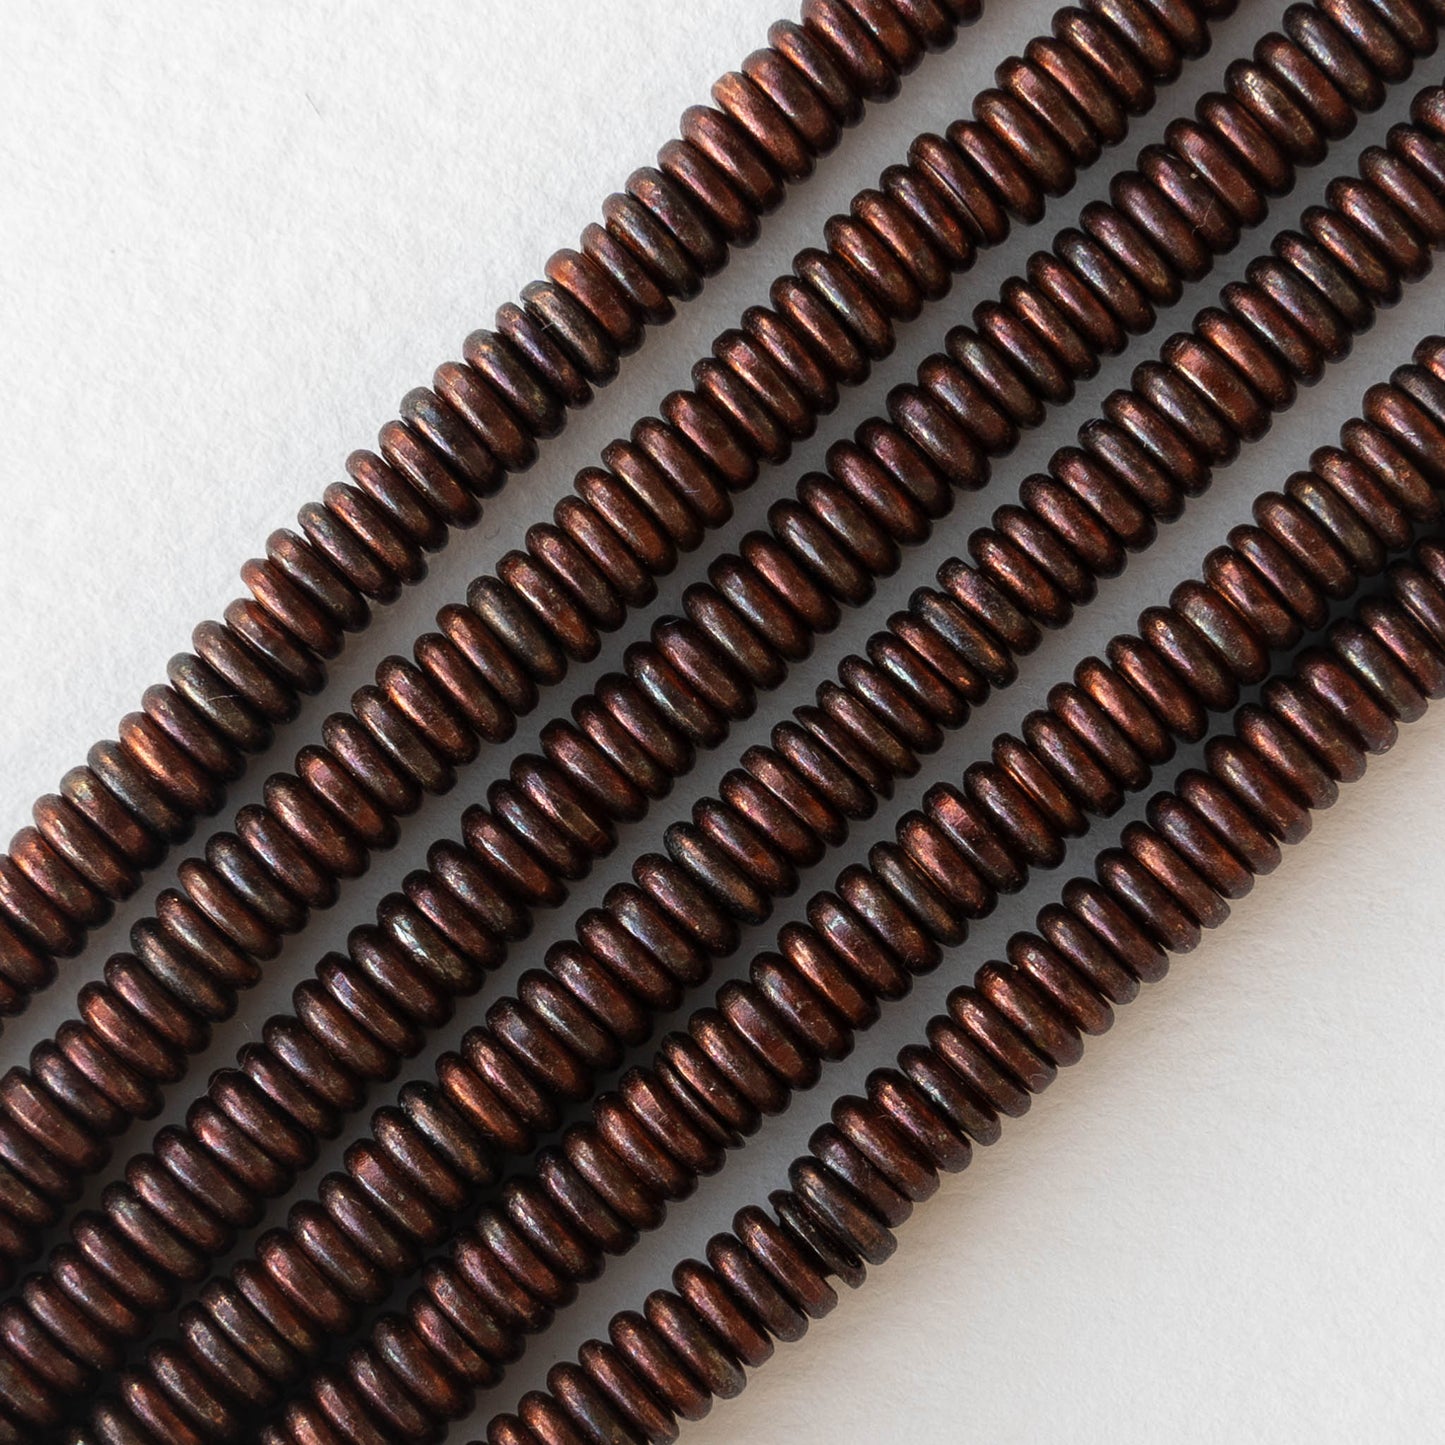 5mm Heishi Disk Beads - Oxidized Copper Plated Brass - 50